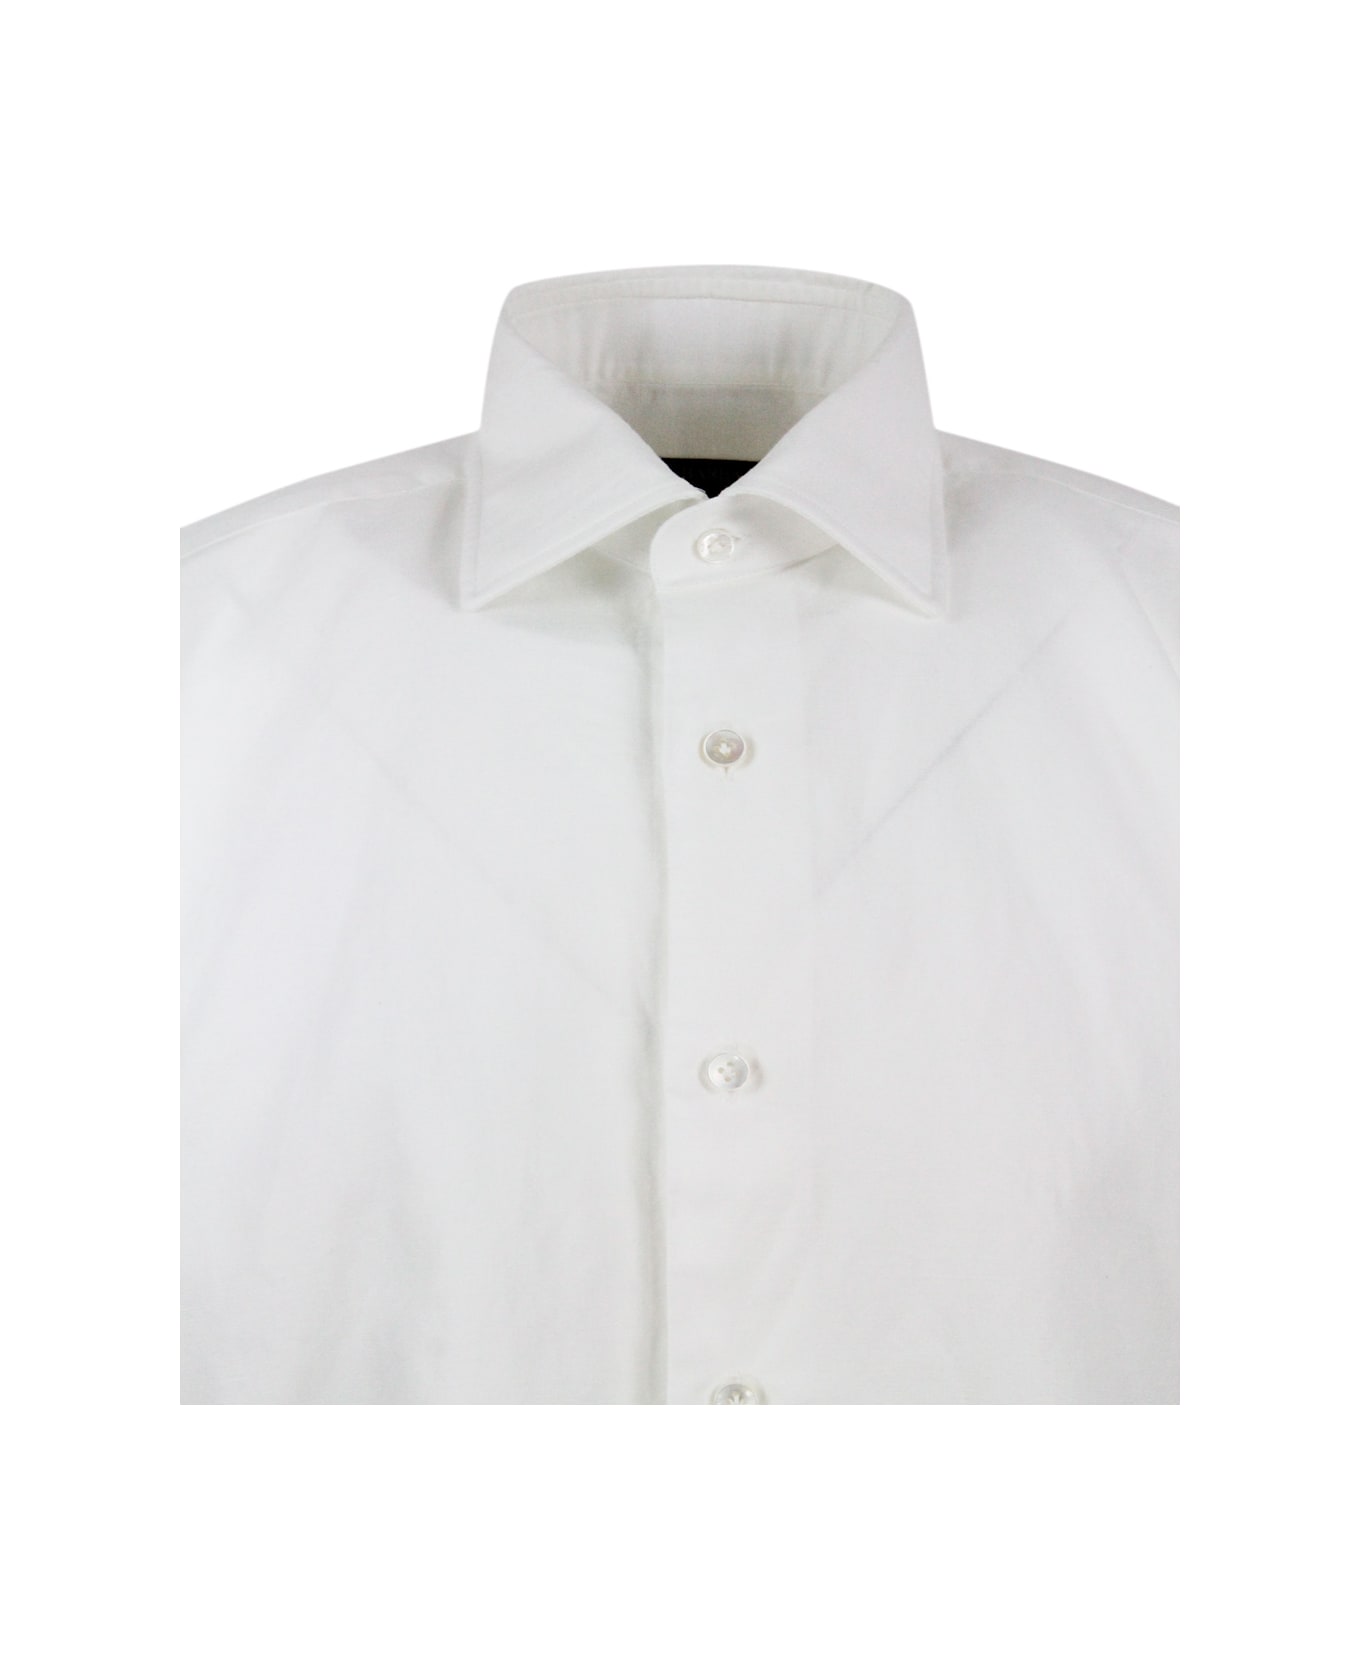 Barba Napoli Cult Shirt In Fine Cotton And Linen With Italian Collar And Hand-sewn With Mother-of-pearl Buttons - White